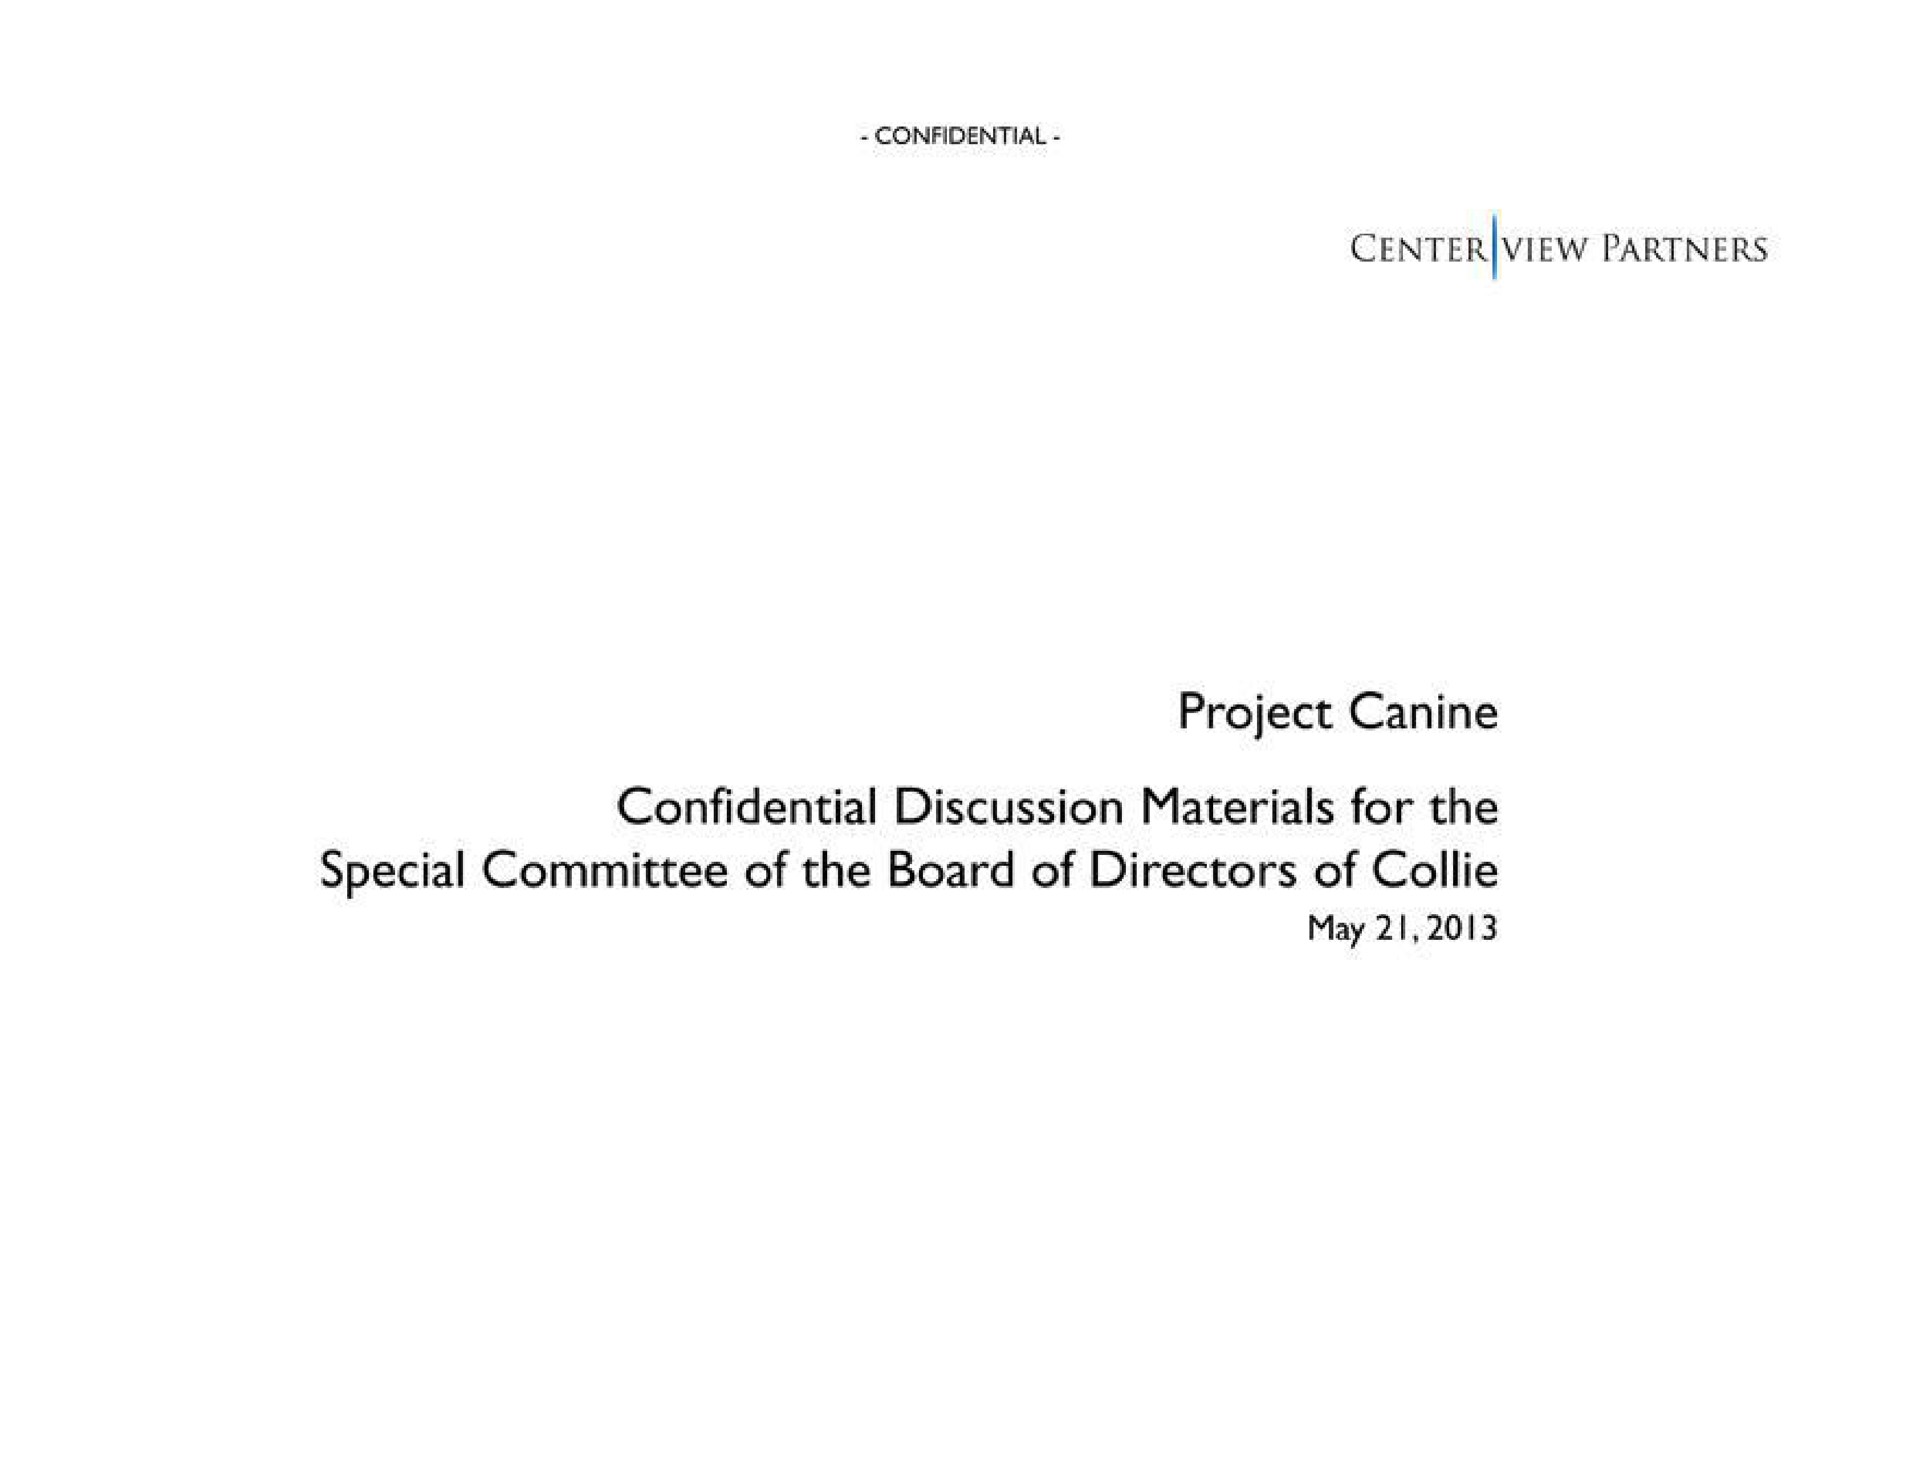 project canine confidential discussion materials for the special committee of the board of directors of collie may | Centerview Partners